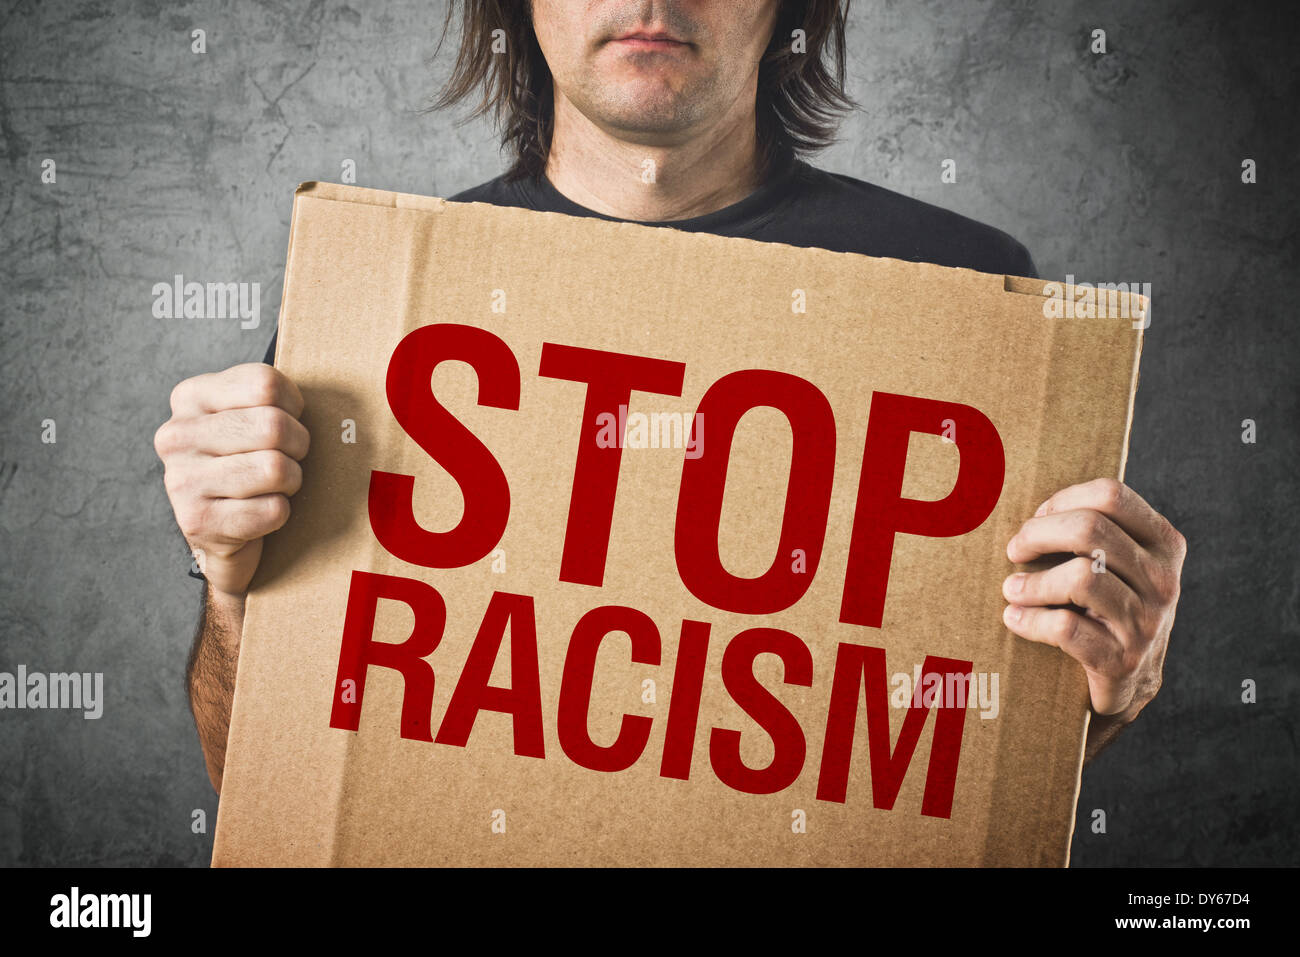 Man holding cardboard banner with STOP RACISM message Stock Photo